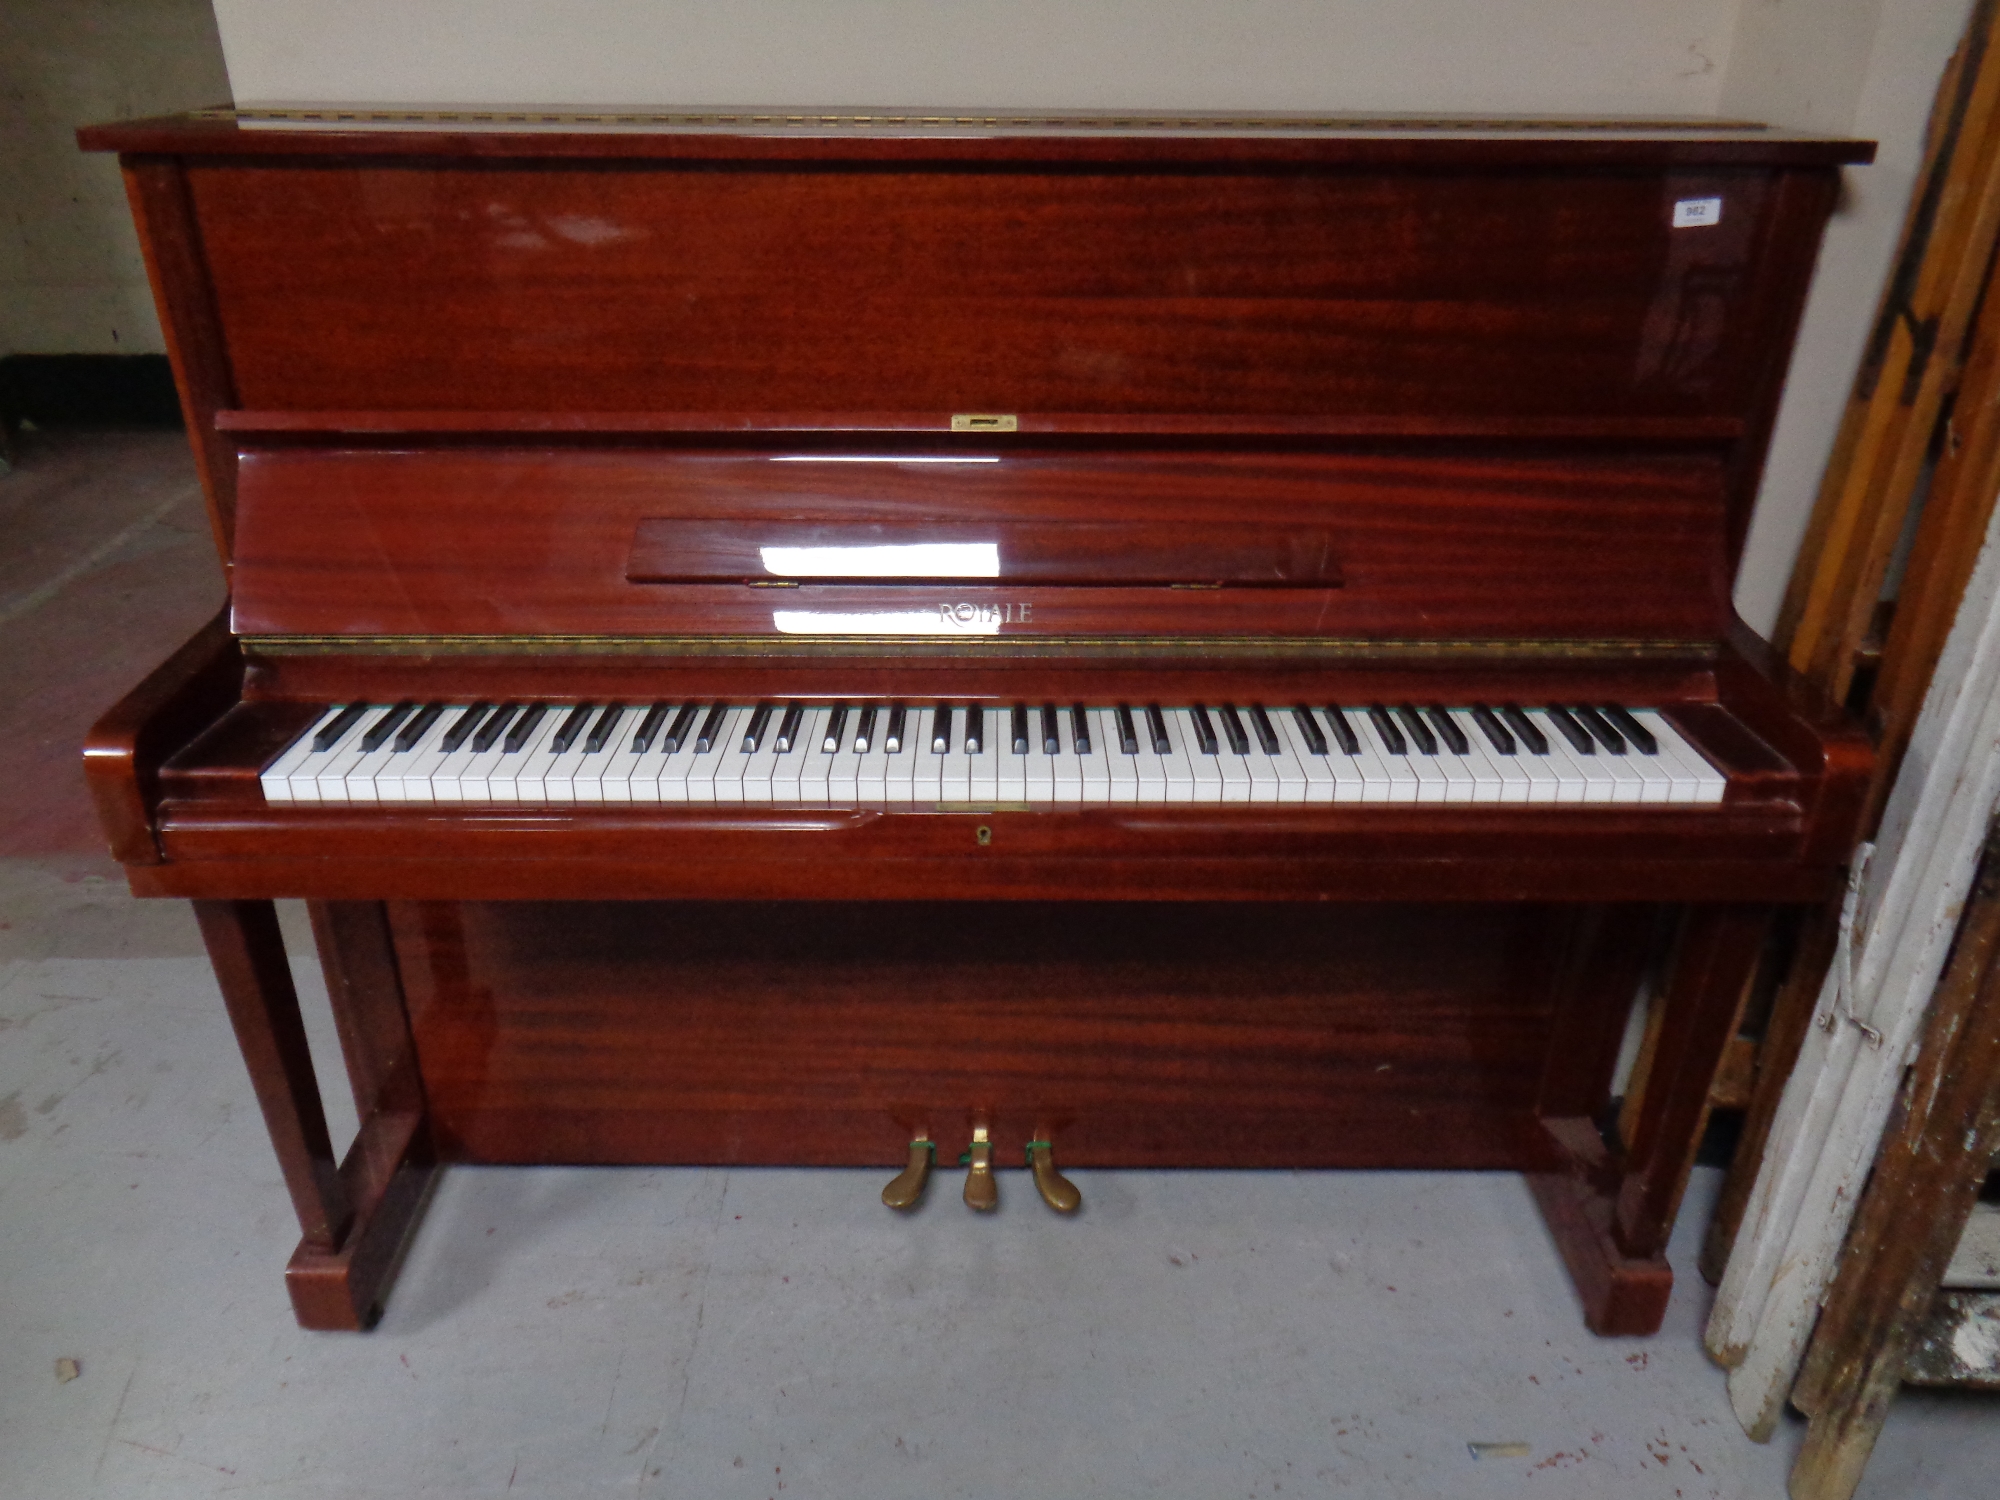 A Royale overstrung upright piano in a mahogany finish